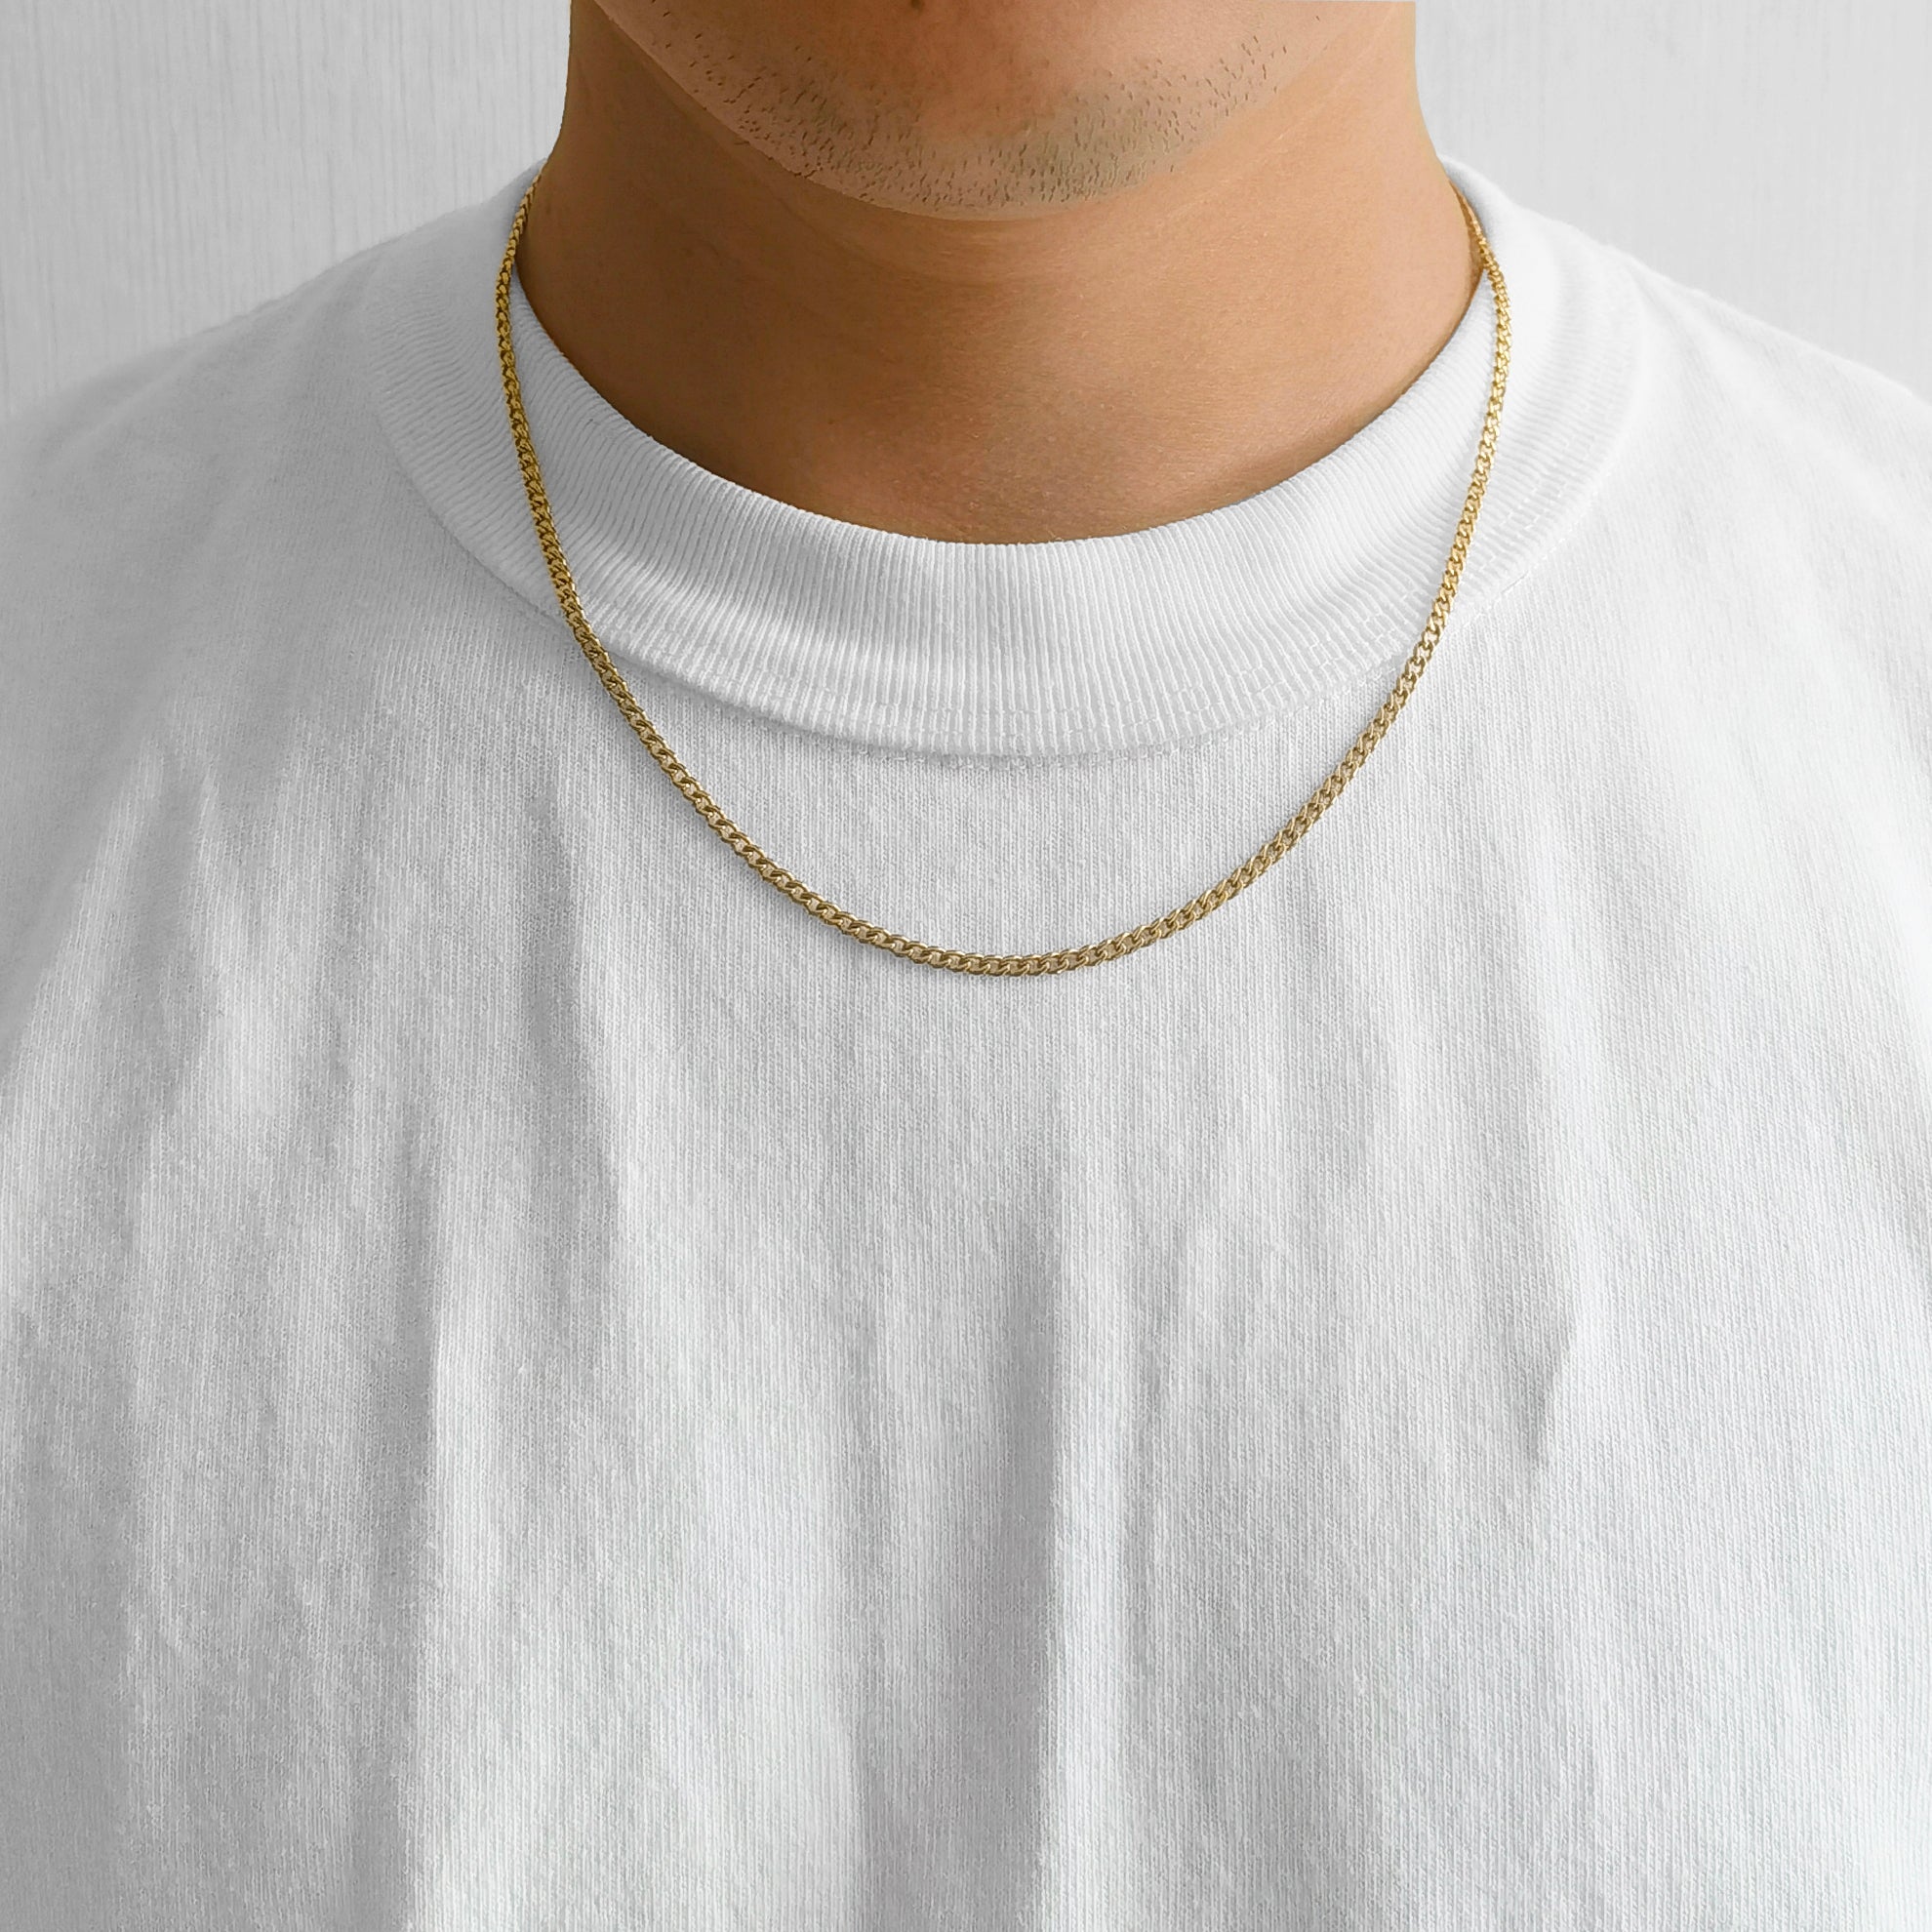 Men's 3mm Gold Plated Steel 18-24 Inch Curb Chain Necklace